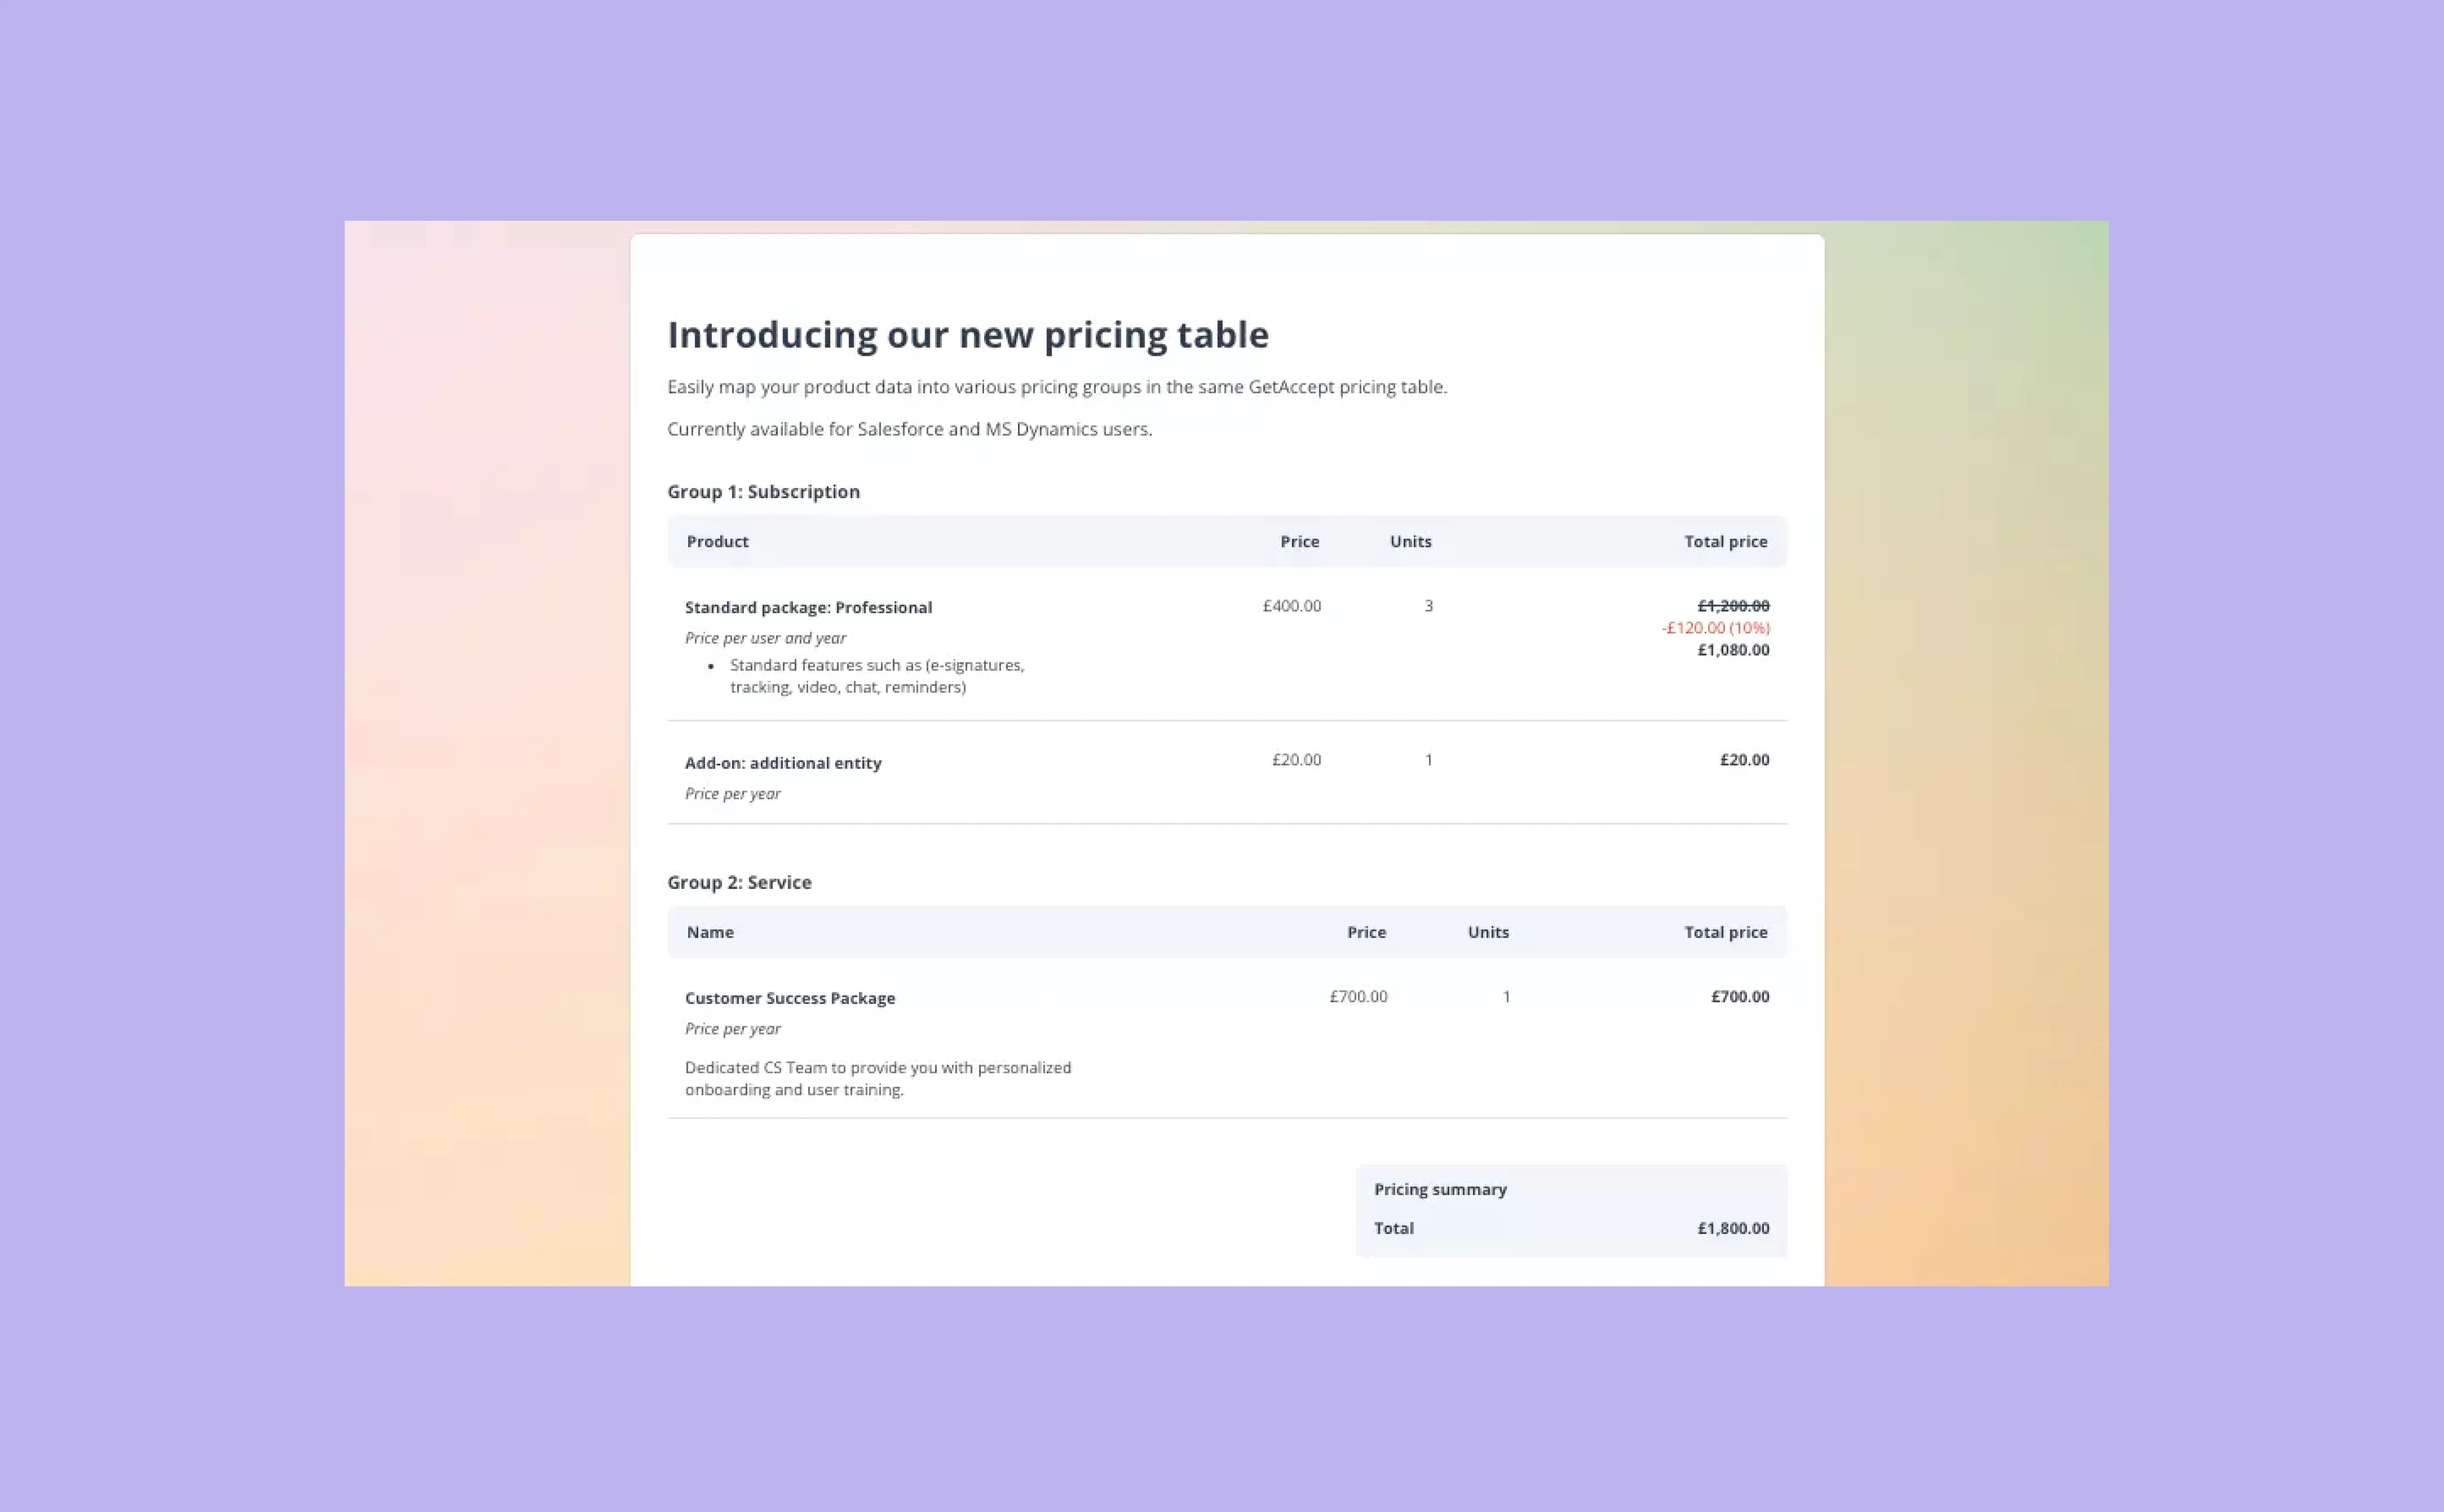 Display your products into different pricing tables and groups